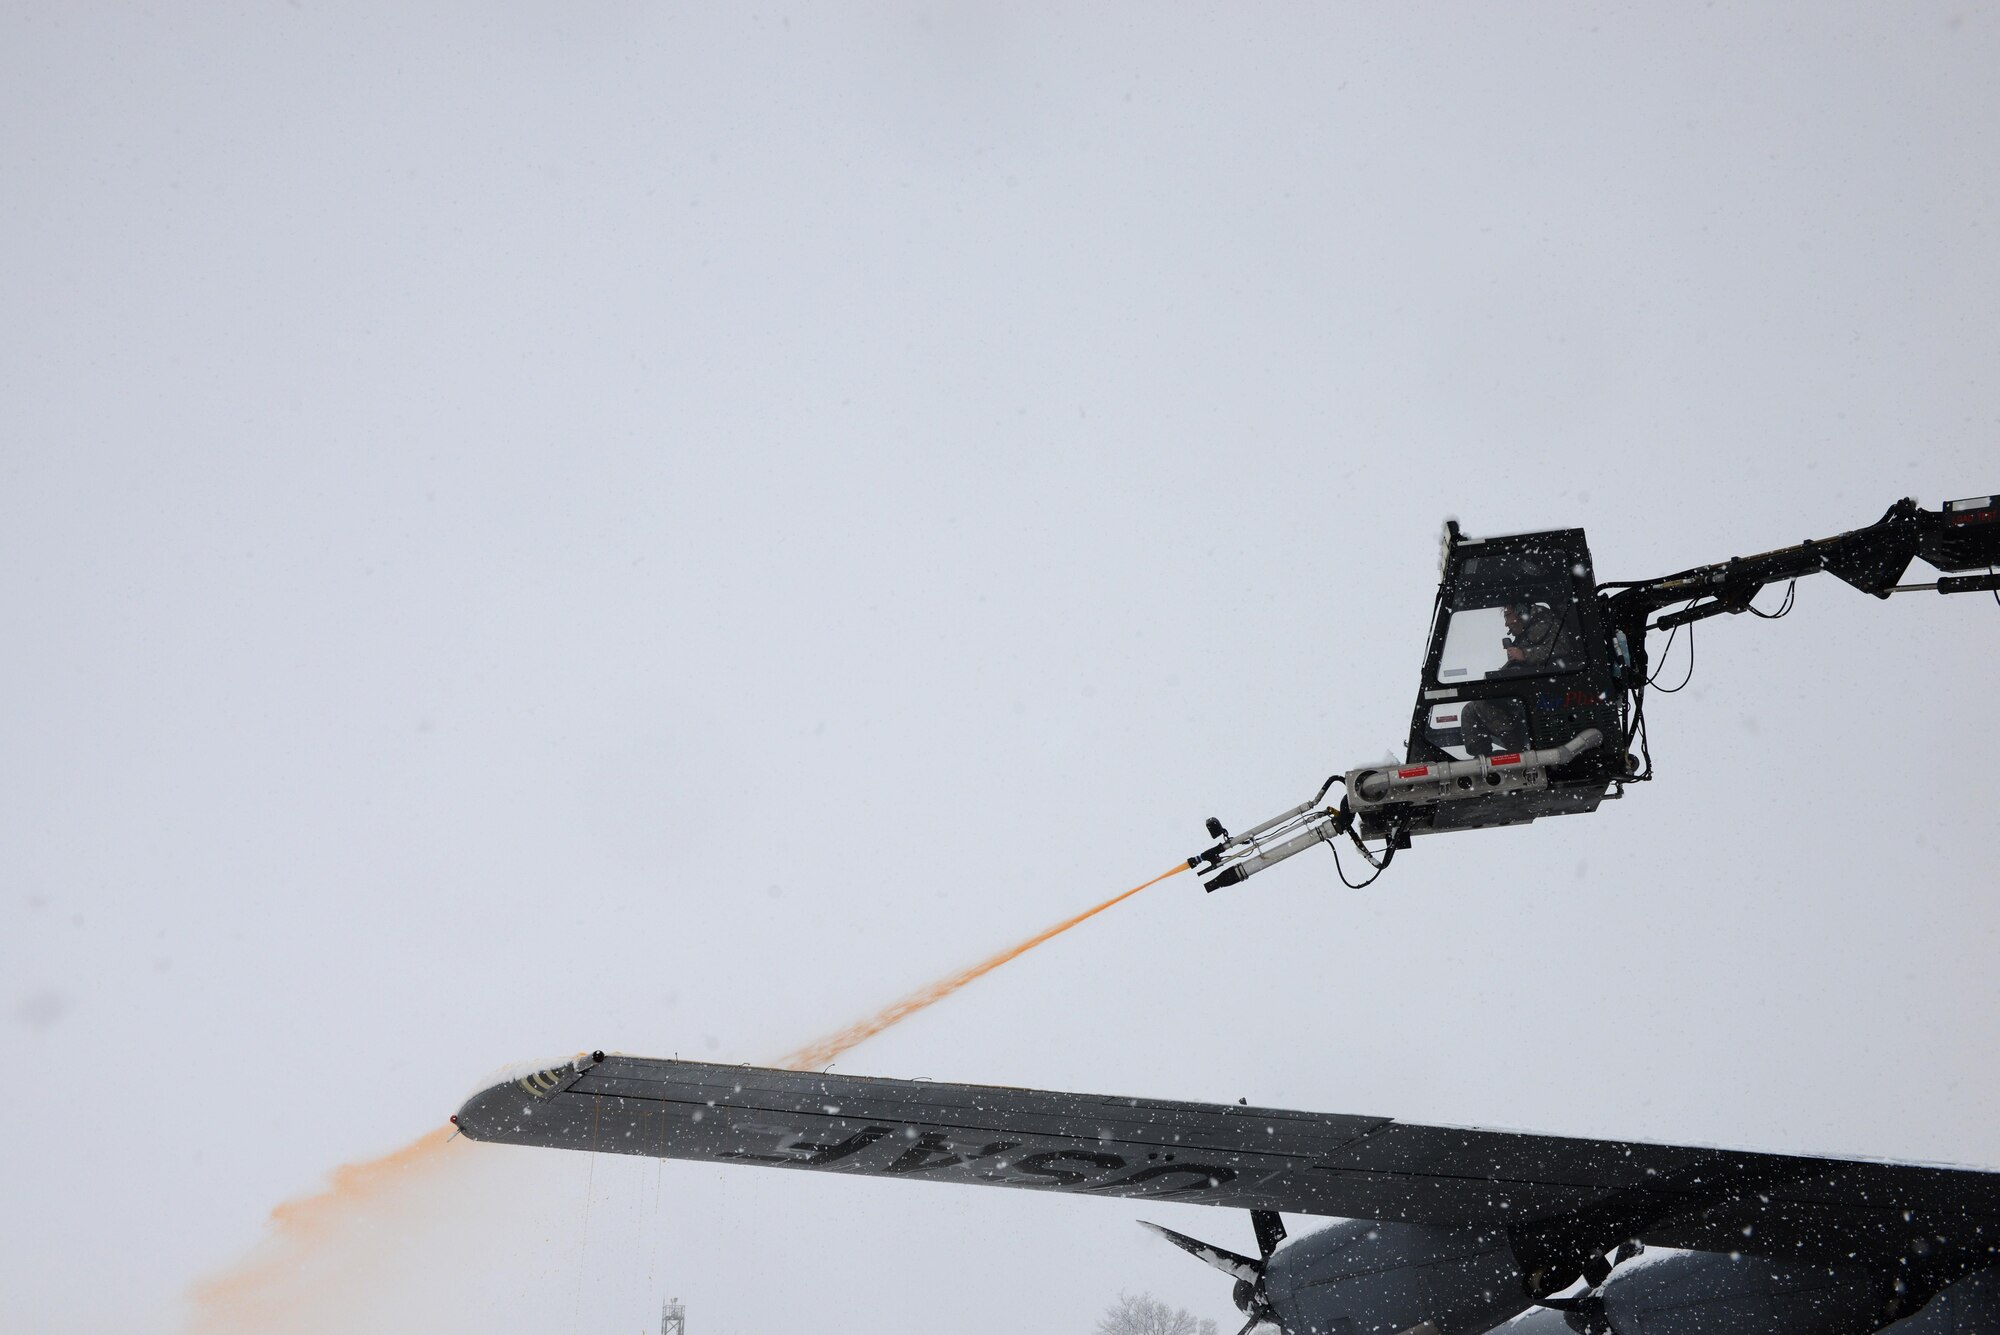 A de-icing vehicle sprays a de-icing fluid onto the wing of a C-130J Super Hercules Aircraft at Ramstein Air Base, Germany, Jan. 10, 2017. Continuous heavy snowfall prevailed throughout the majority of the day, prompting snow removal operations across the installation. The fluid helps prevent build-up of snow for a certain amount of time, especially before flight. (U.S. Air Force photo by Airman 1st Class Joshua Magbanua)